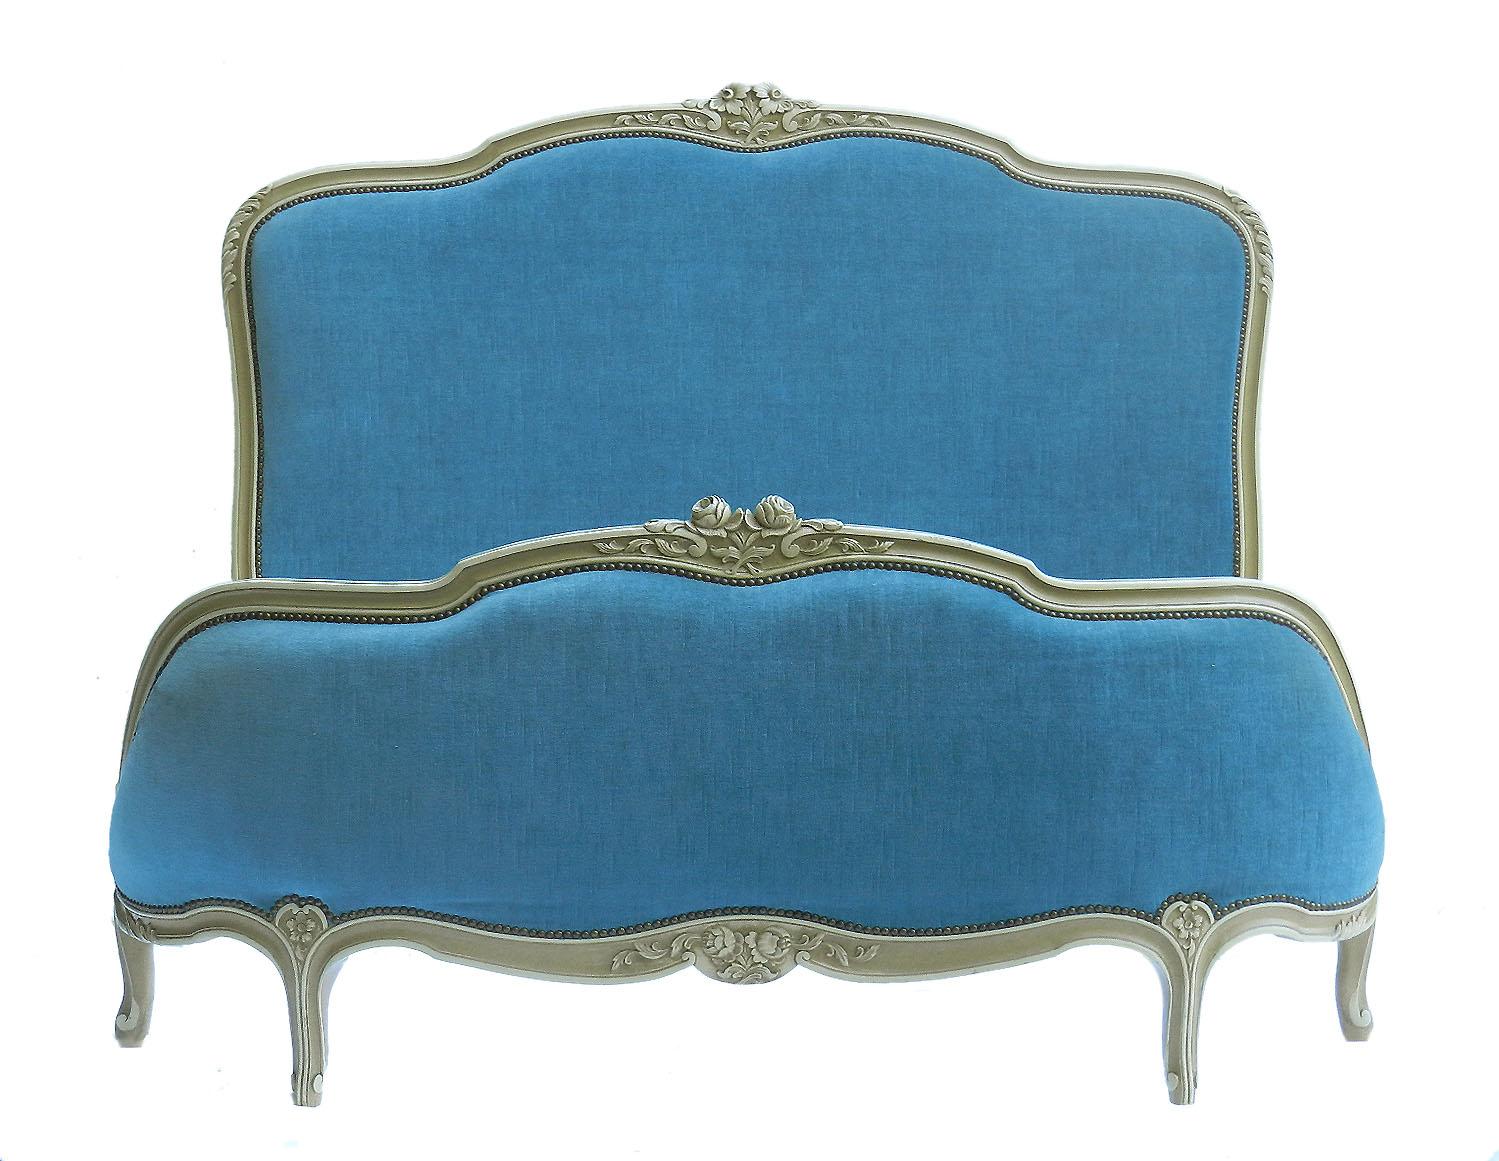 French Louis XV vintage bed US queen UK king size Hollywood Regency
Upholstered in blue velour use as is or recover
Carved wood has original patina, antique paint finish
circa 1960 Louis XV revival
The bed is good quality sound, solid and clean